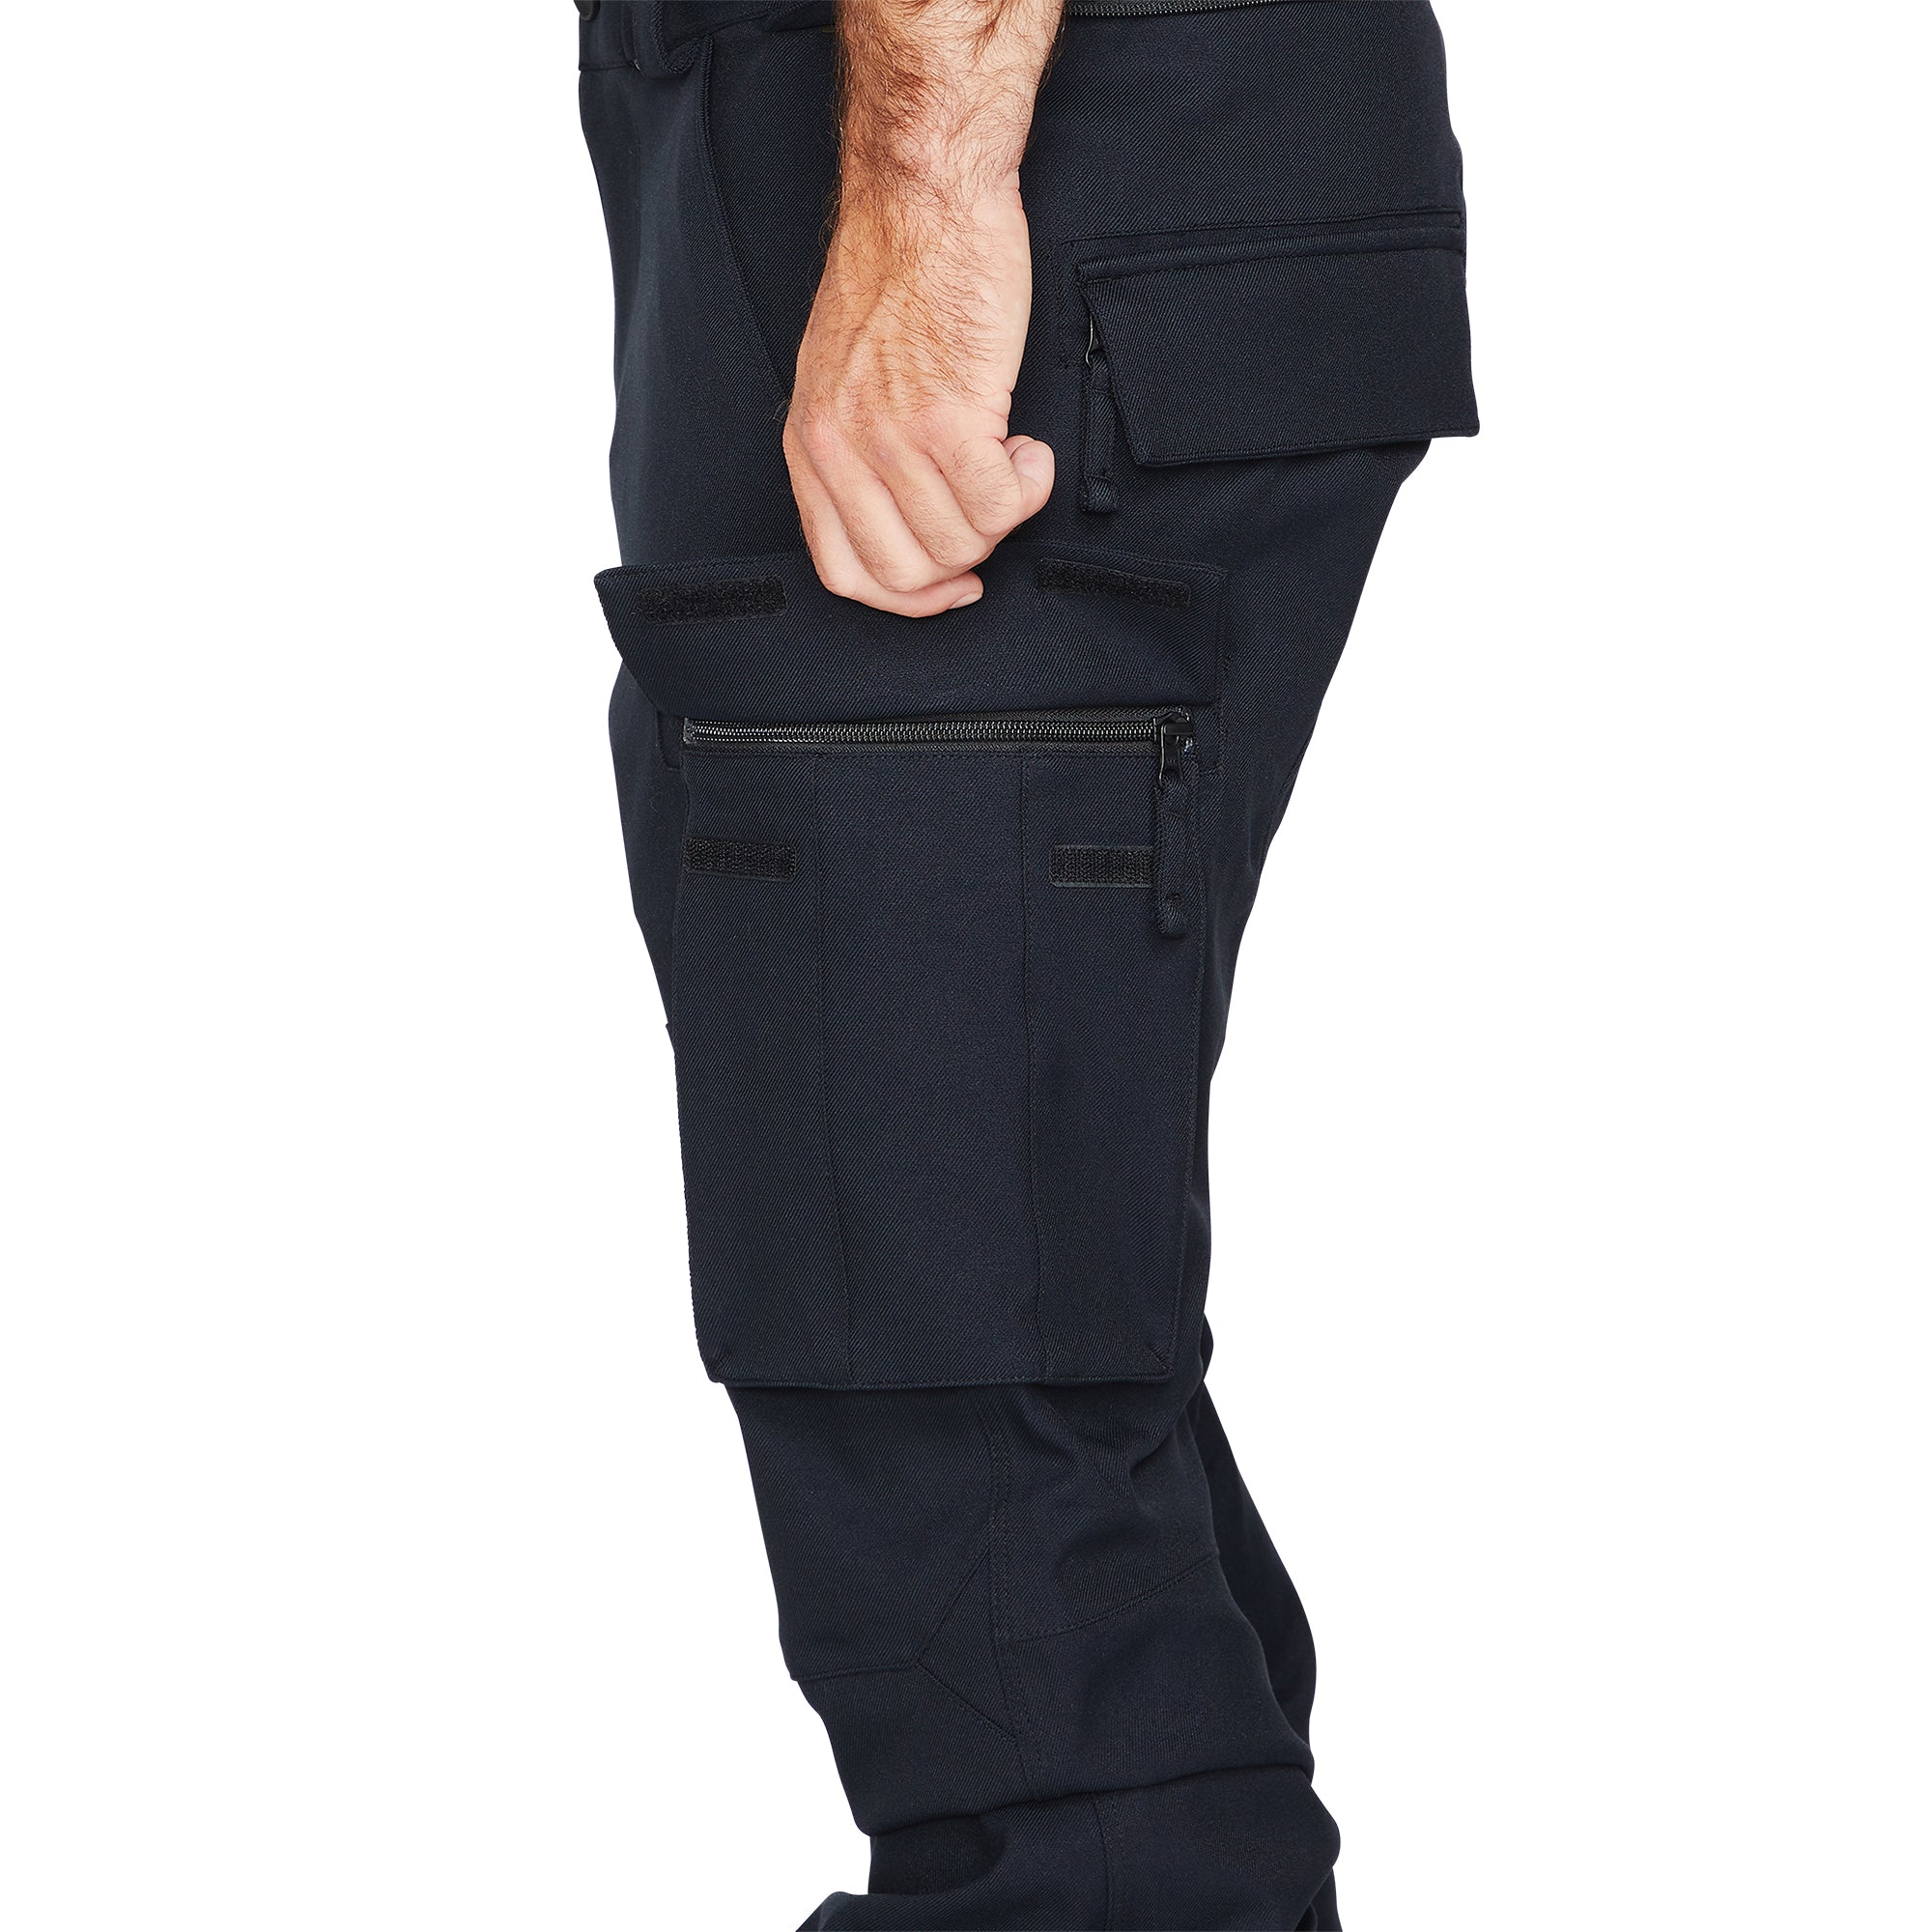 New Articulated Snowboard Pant Black